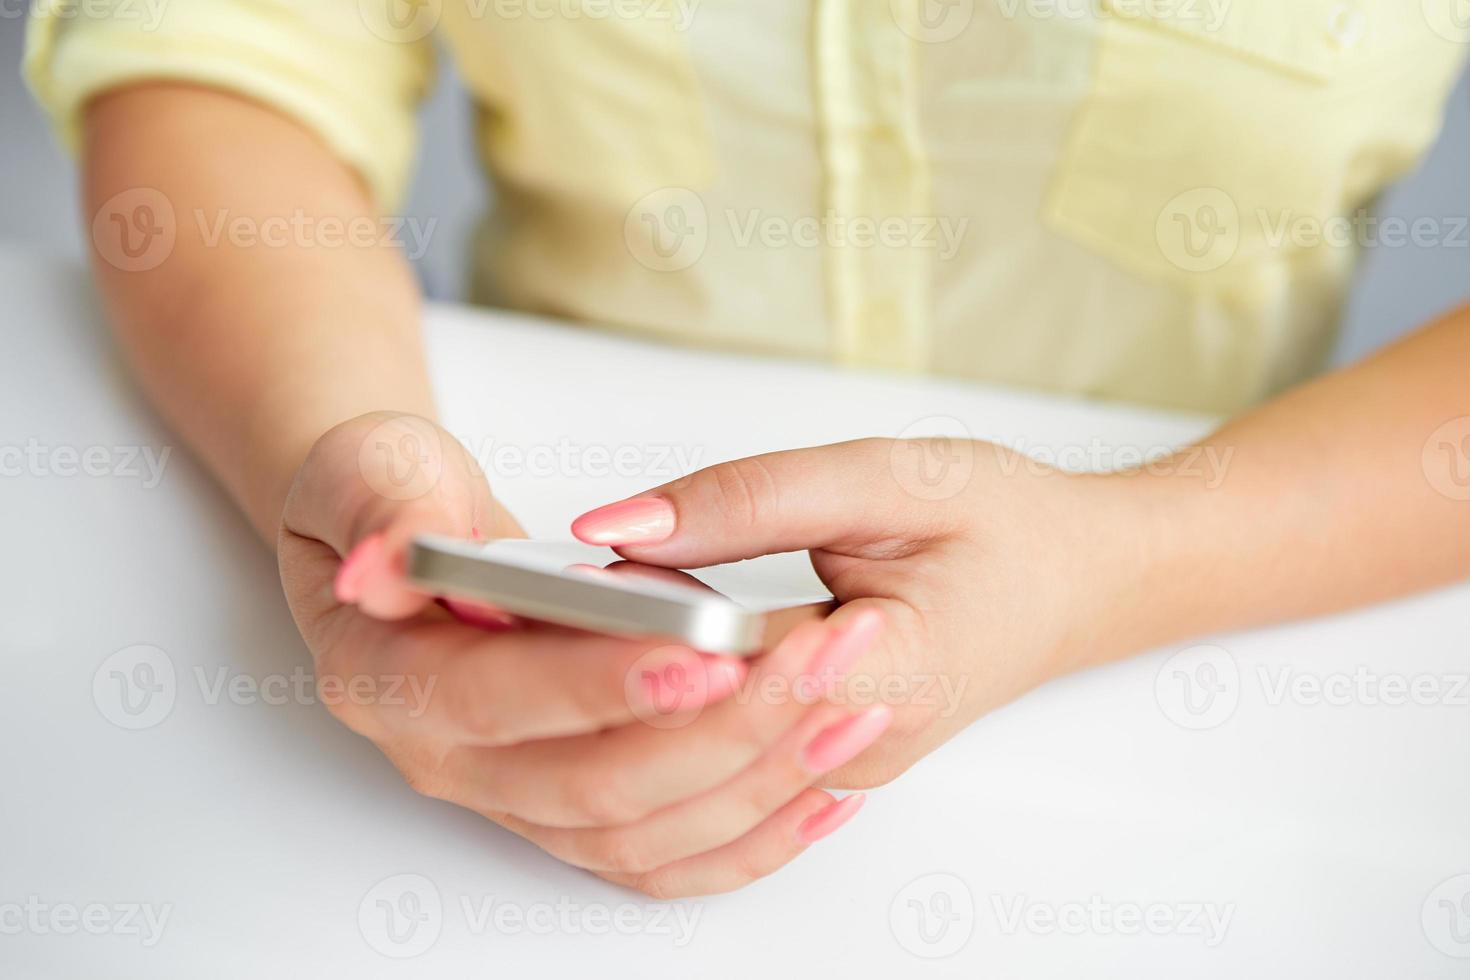 Female hand holding a cell phone photo